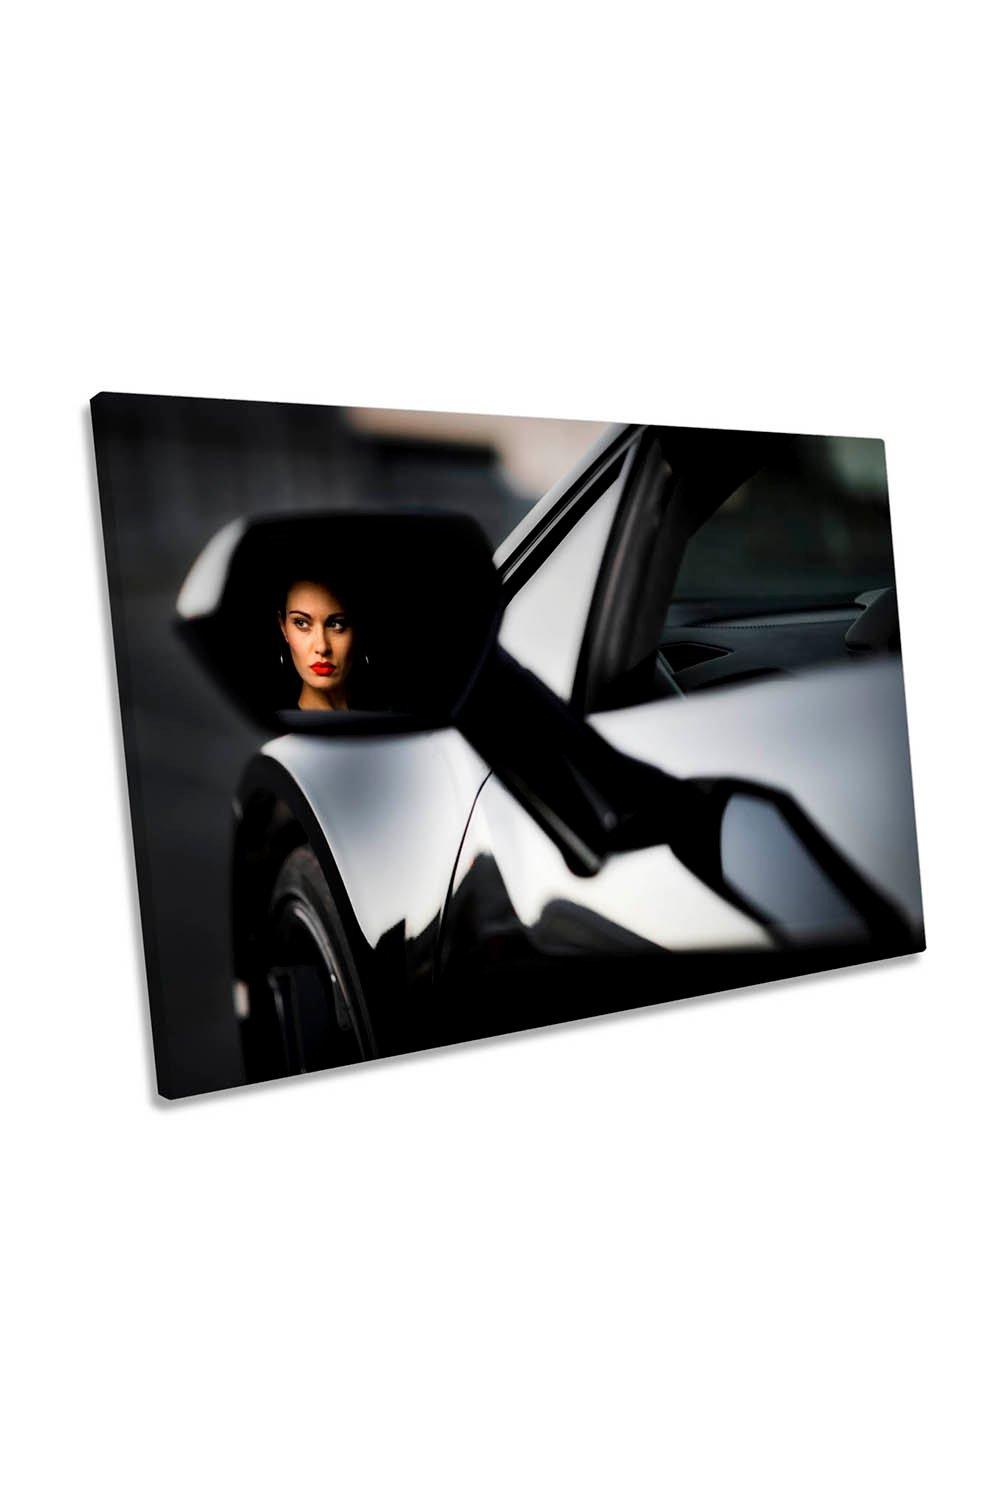 Reflection Woman Car Window Model Canvas Wall Art Picture Print